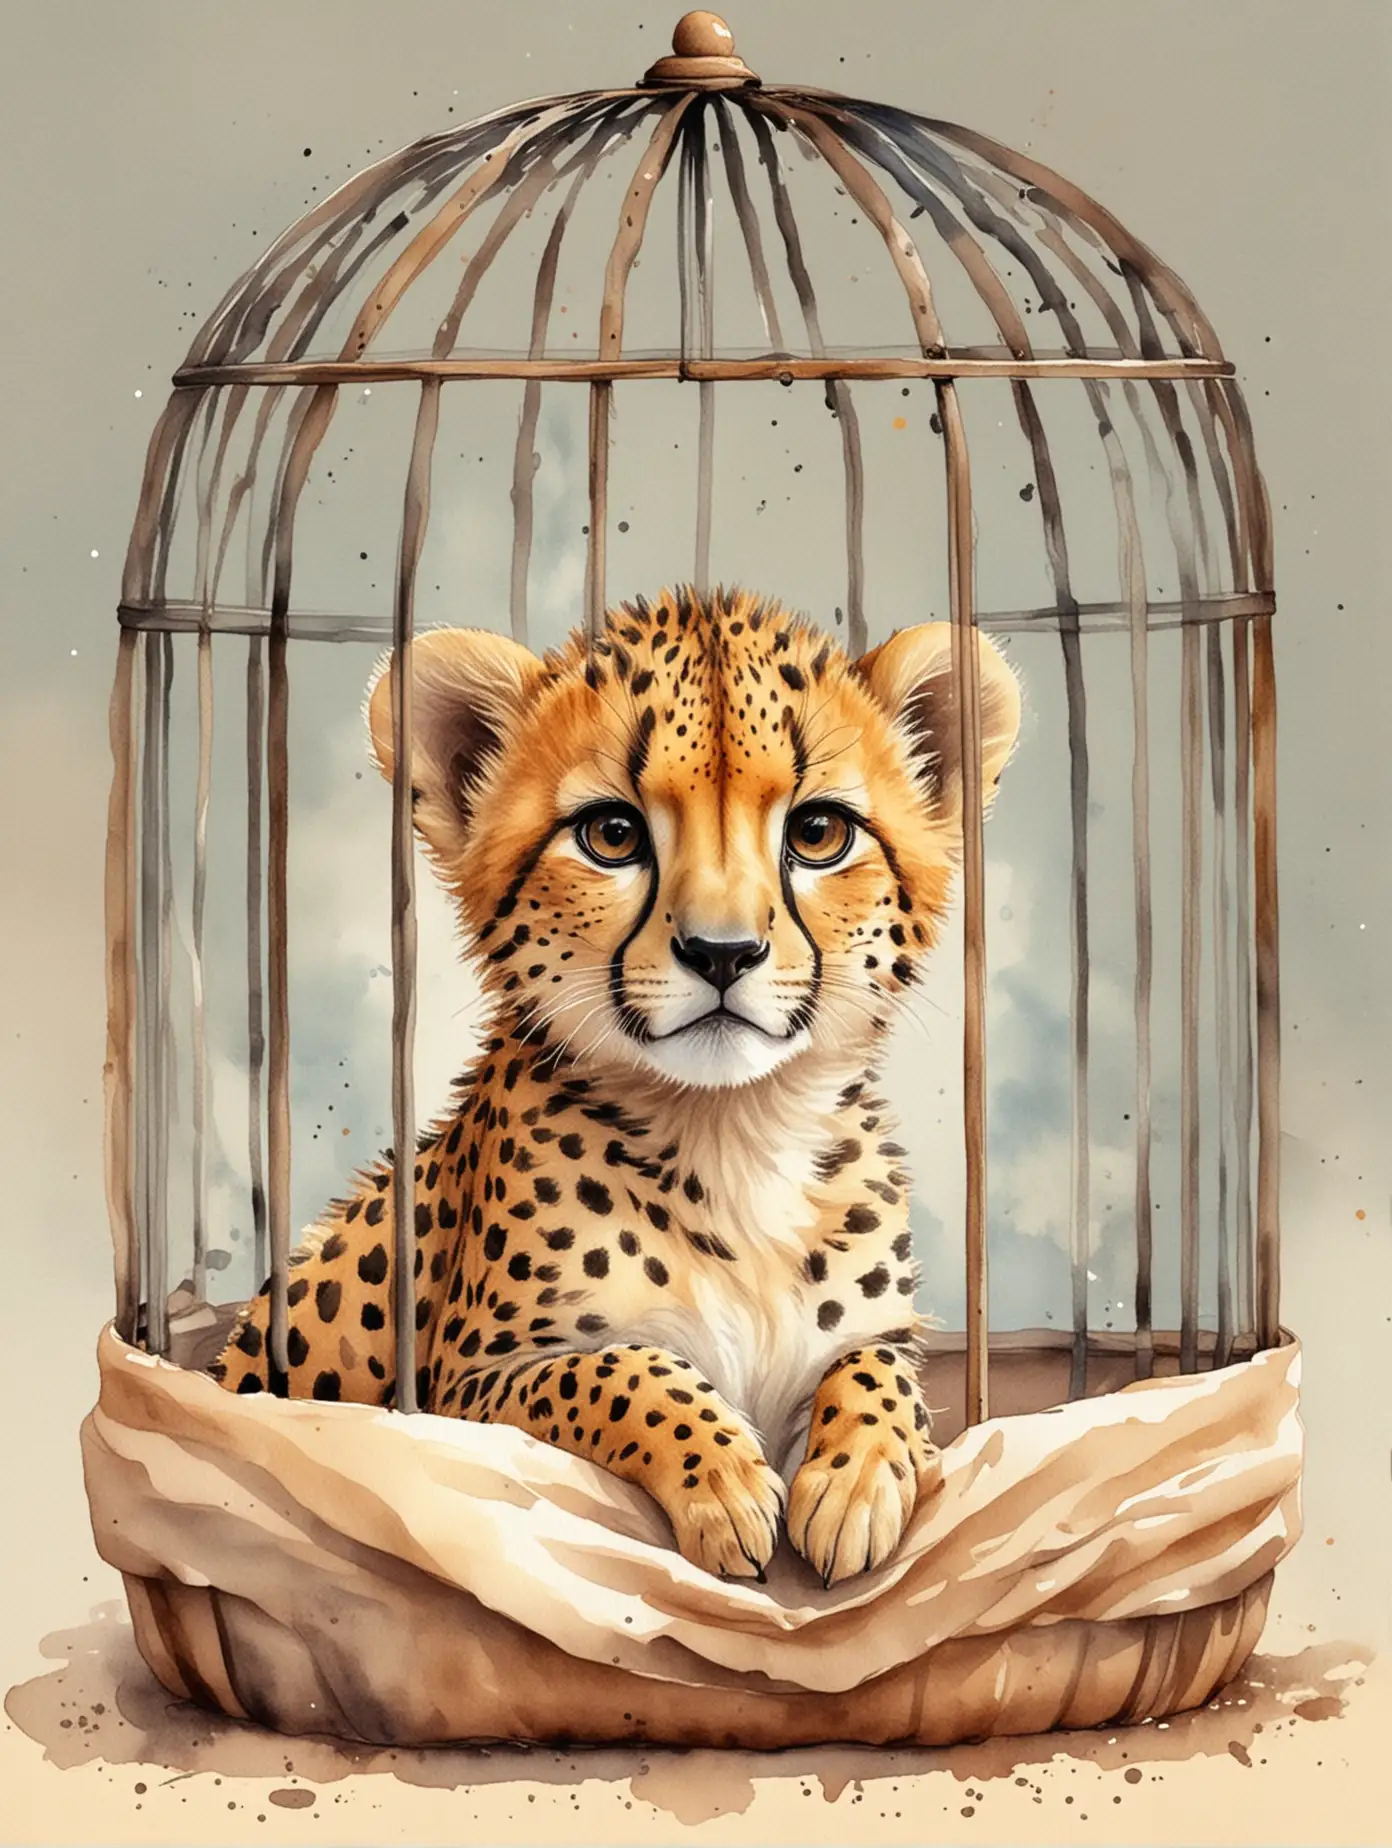 Adorable Cheetah Captured in a Vivid Watercolor Painting